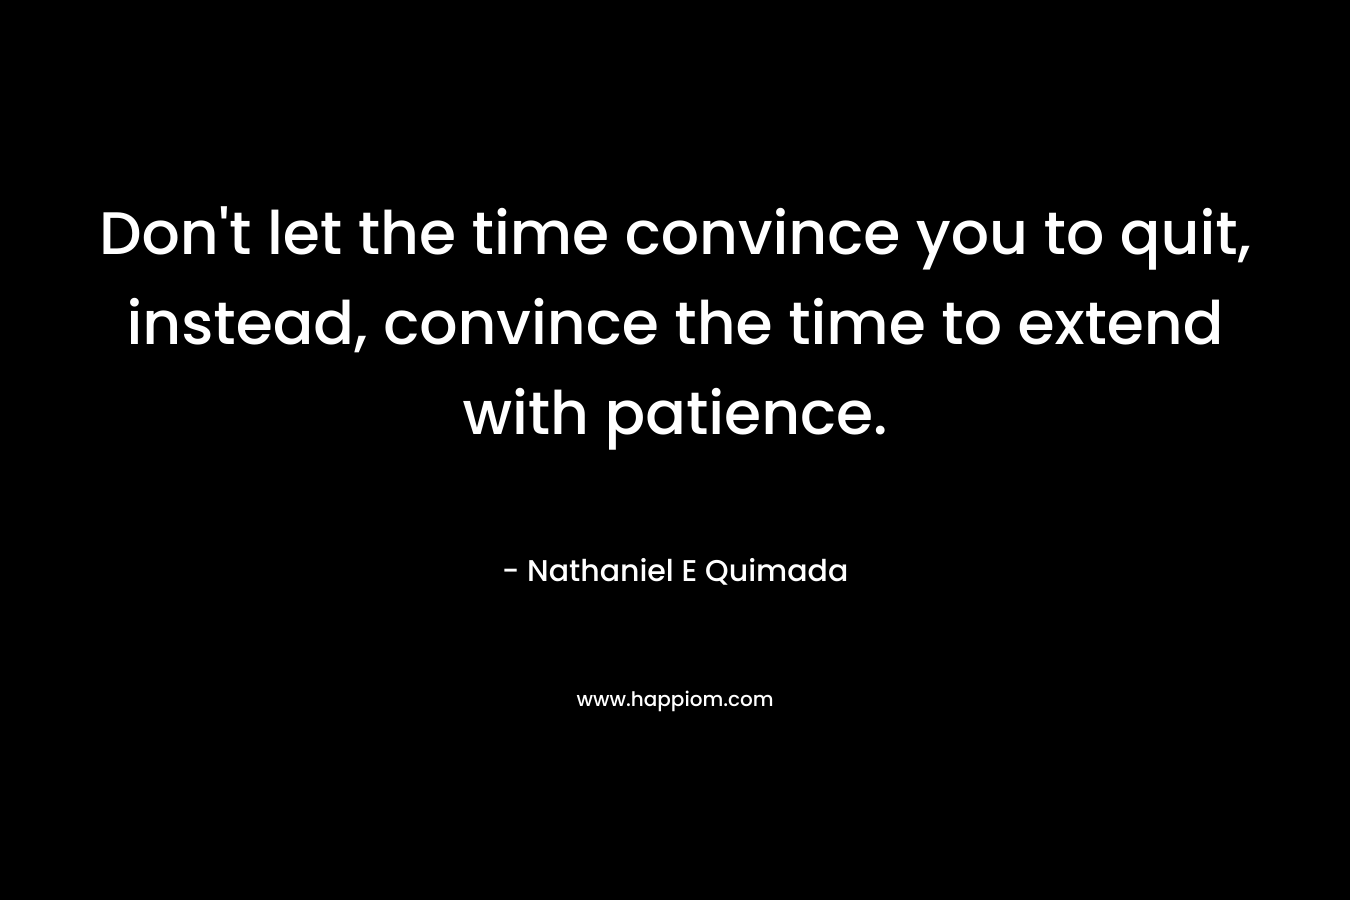 Don’t let the time convince you to quit, instead, convince the time to extend with patience. – Nathaniel E Quimada